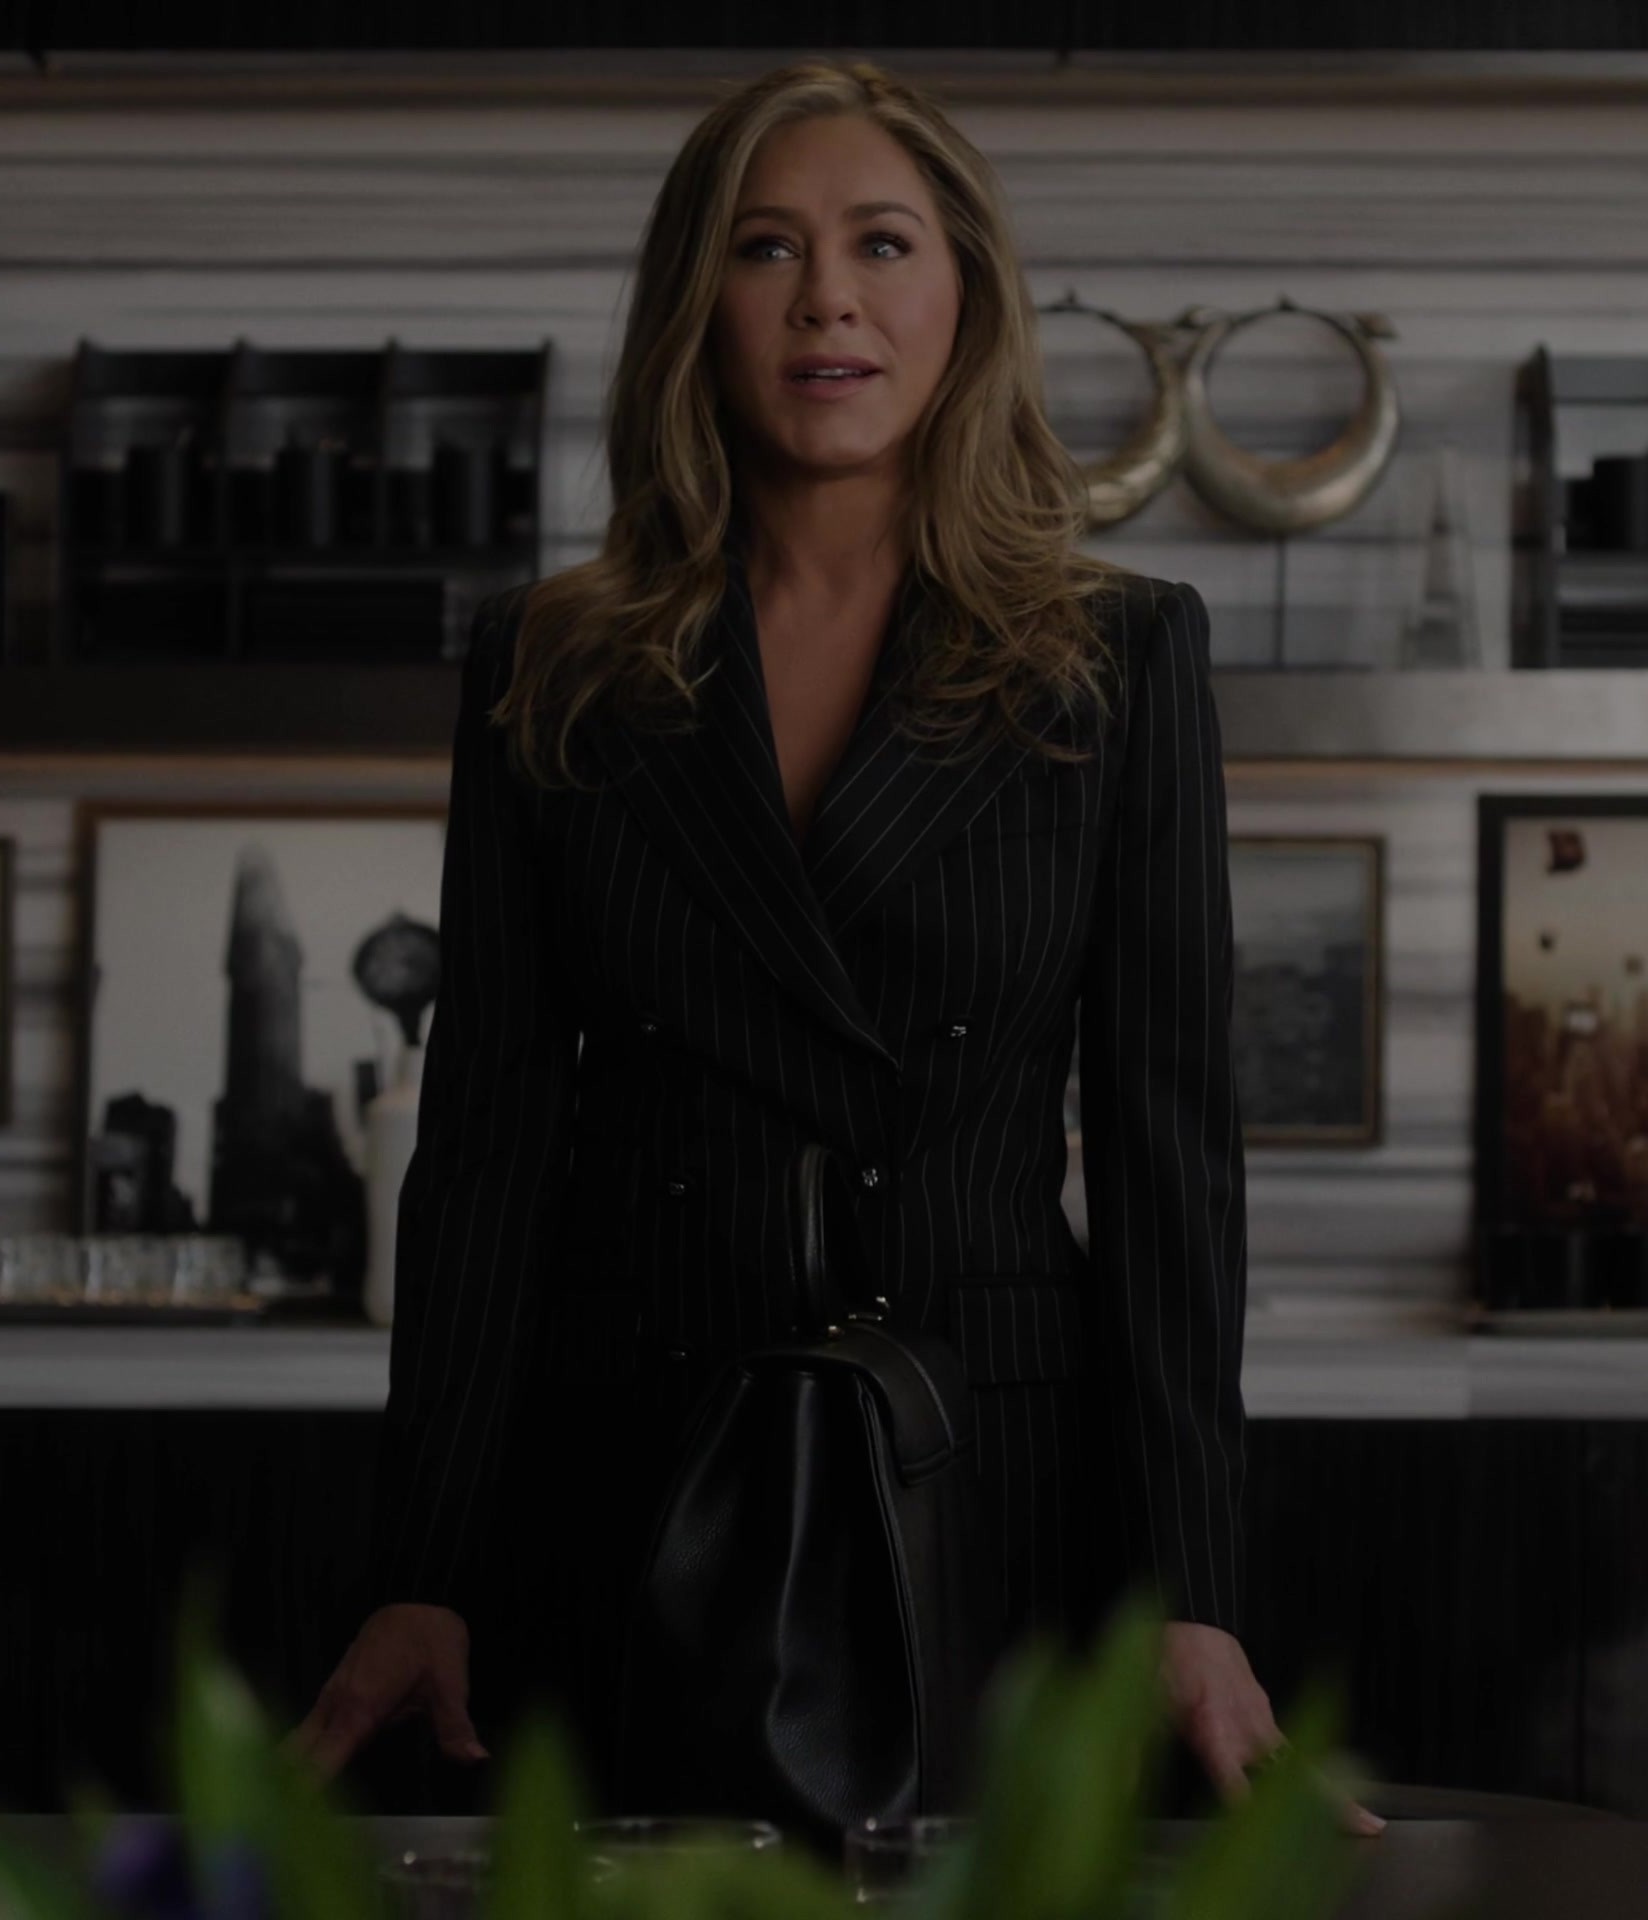 Worn on The Morning Show TV Show - Black Striped Double-Breasted Blazer Worn by Jennifer Aniston as Alexandra "Alex" Levy